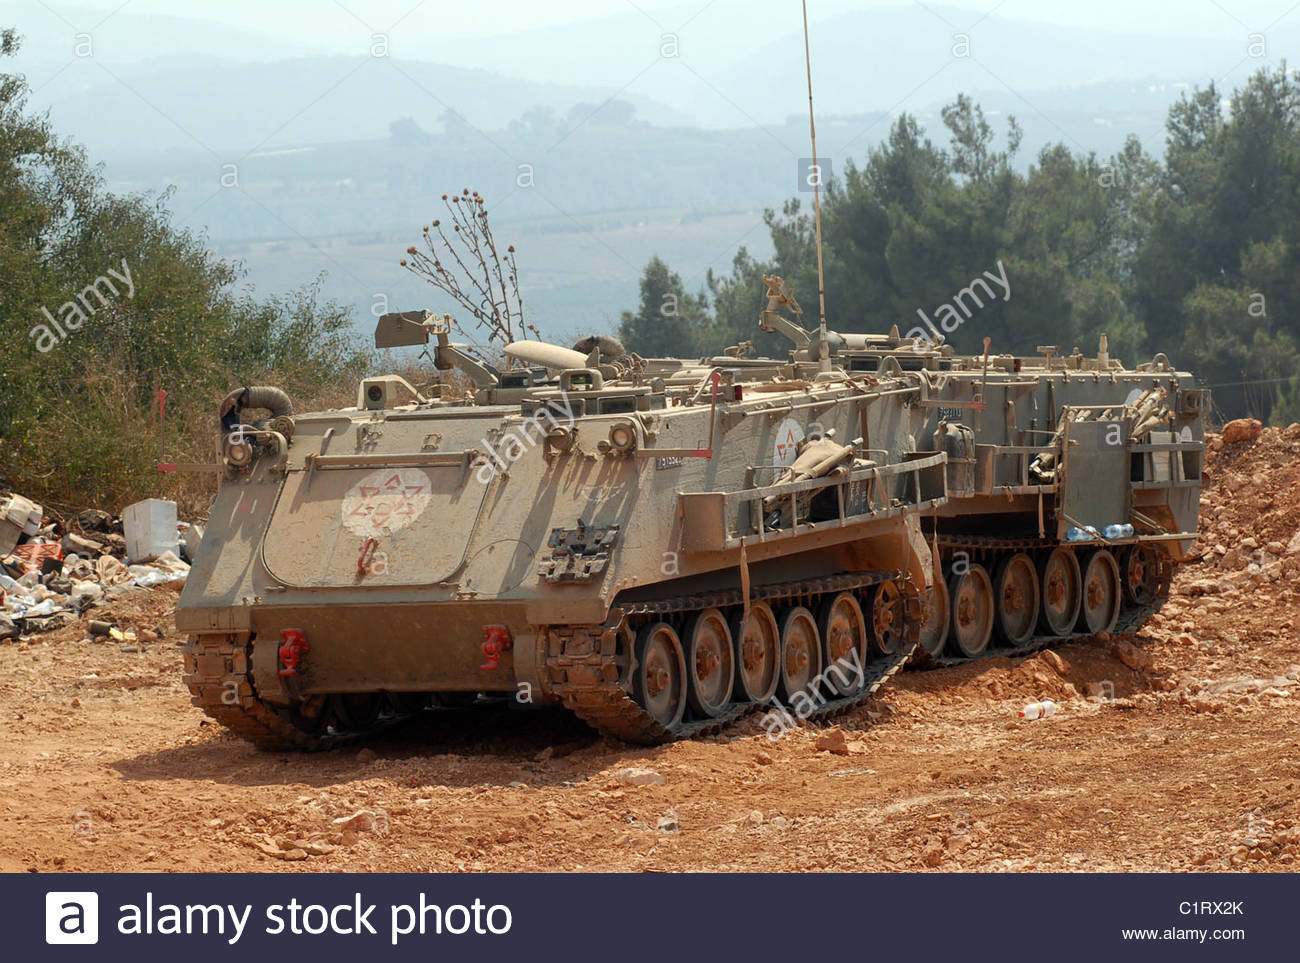 M113 Armored Personnel Carrier #6